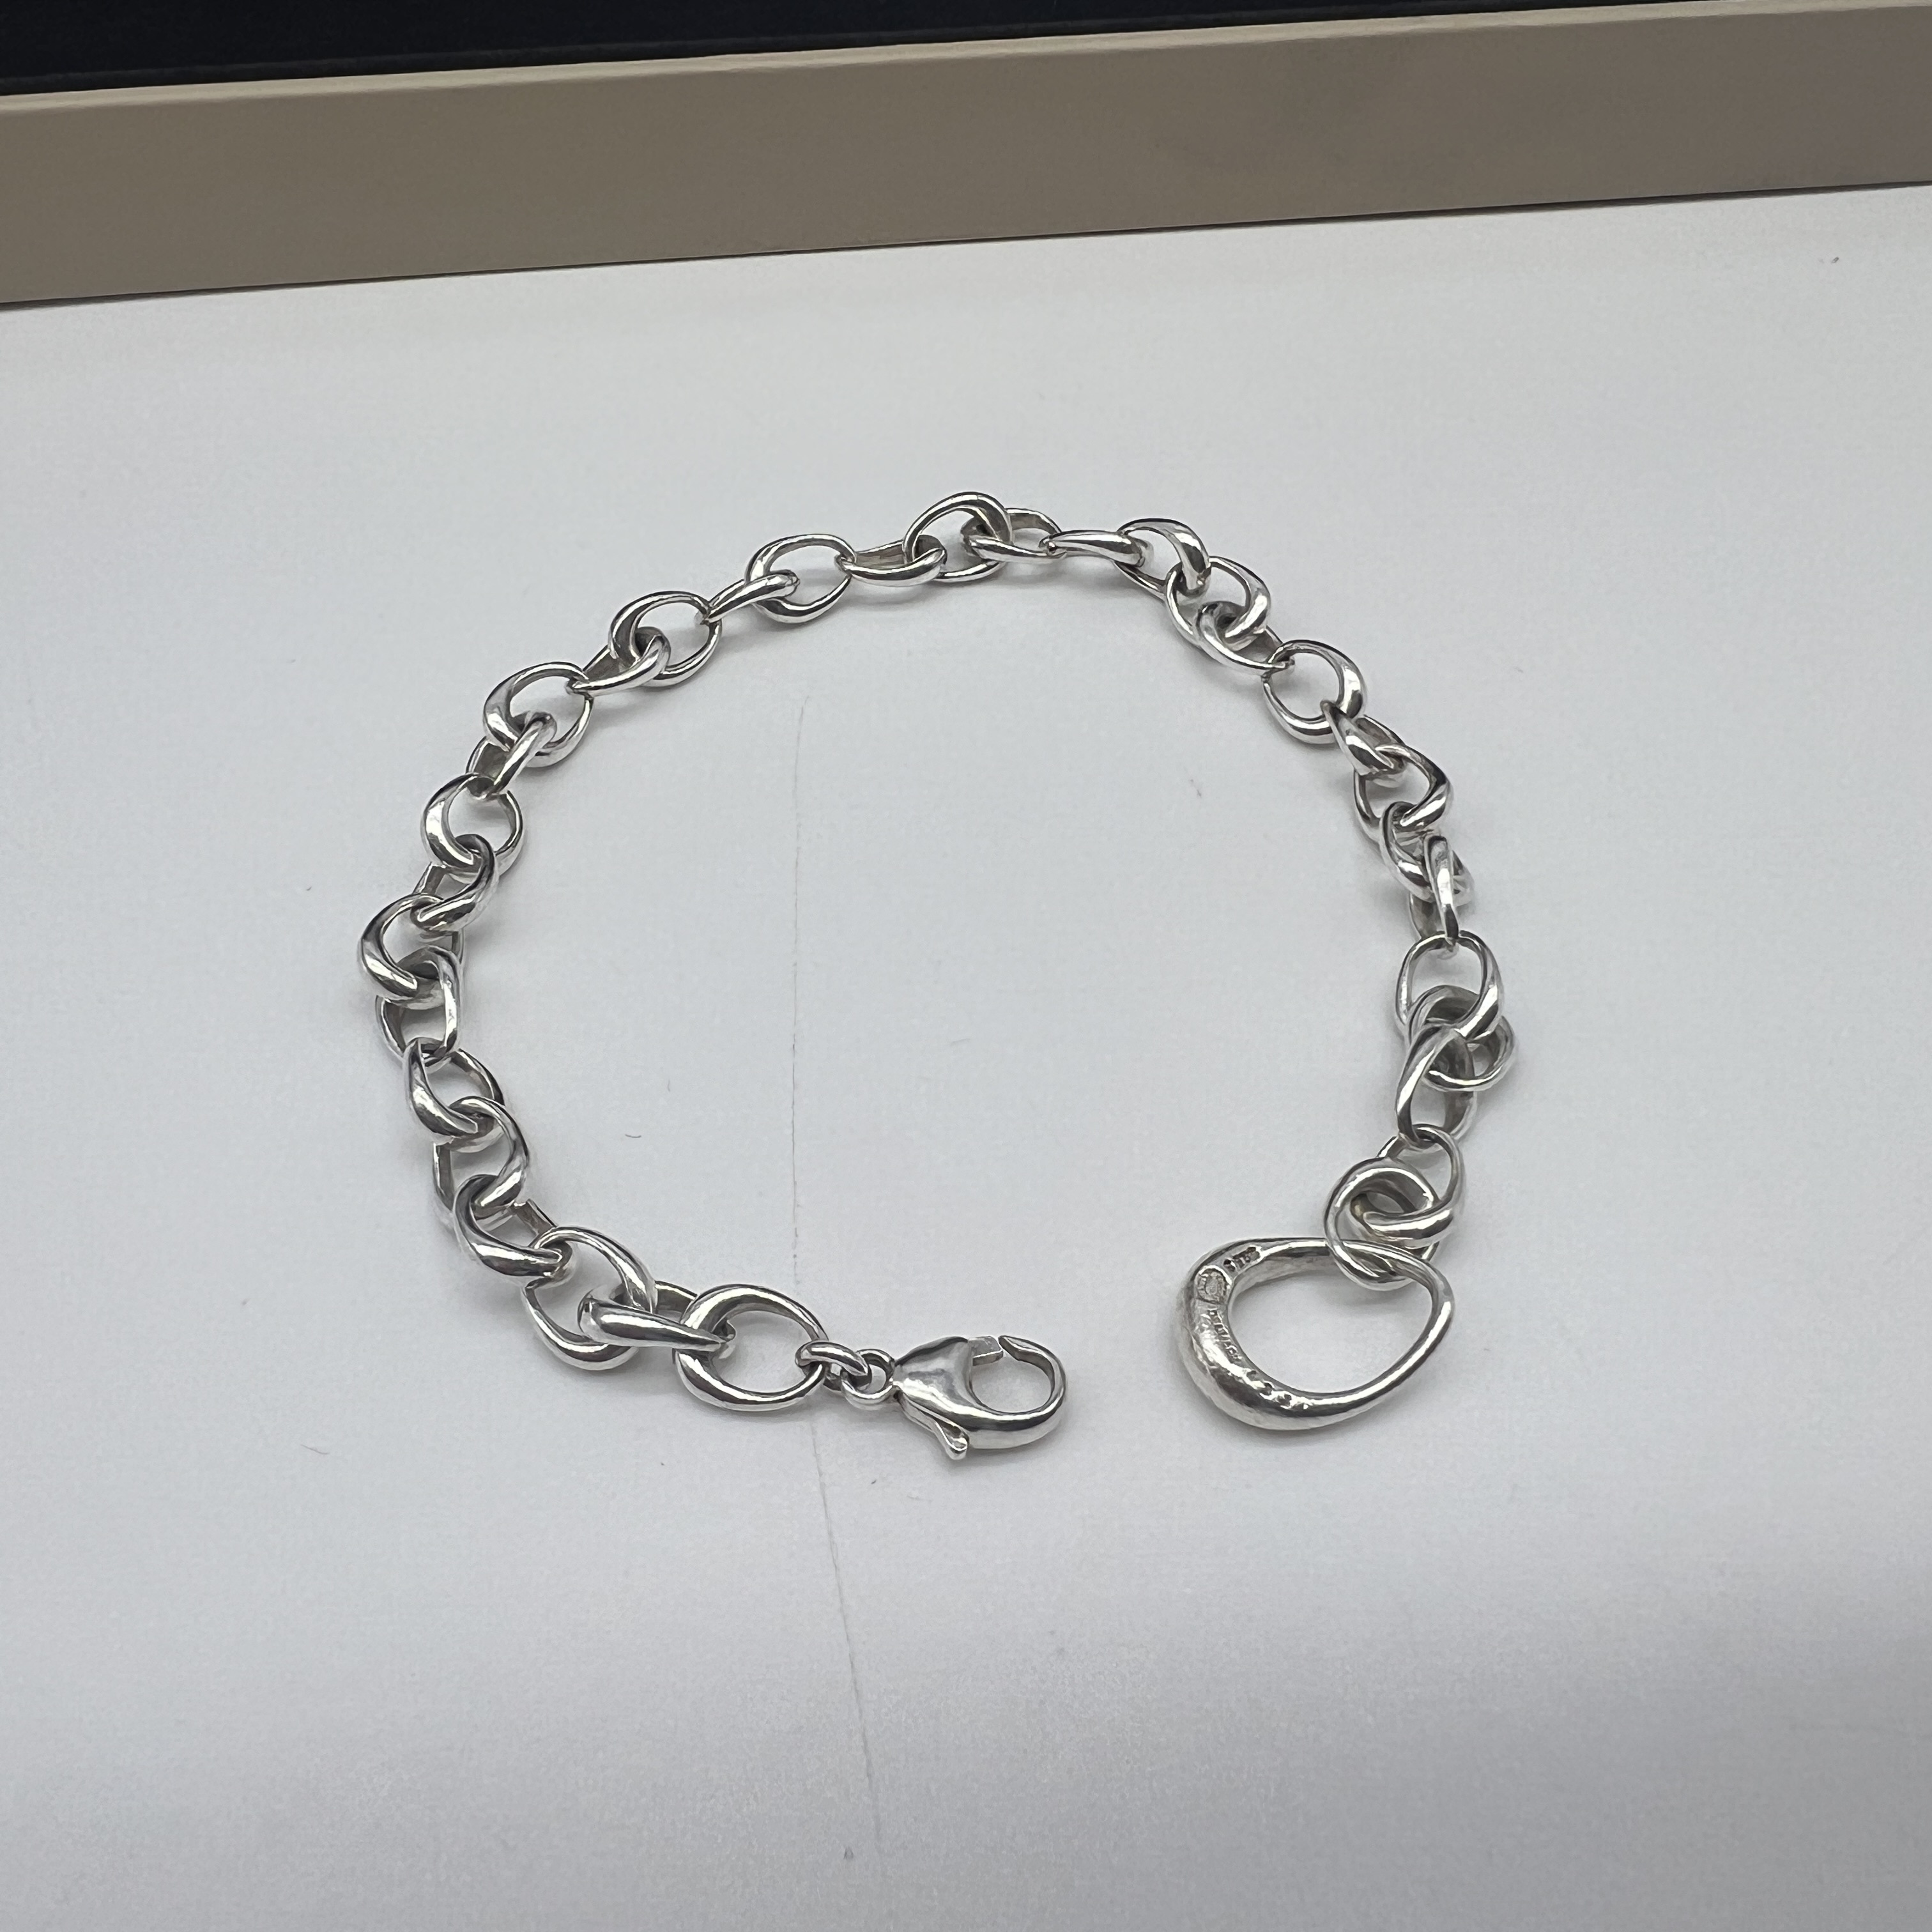 A silver Georg Jensen necklace and bracelet - Image 6 of 7